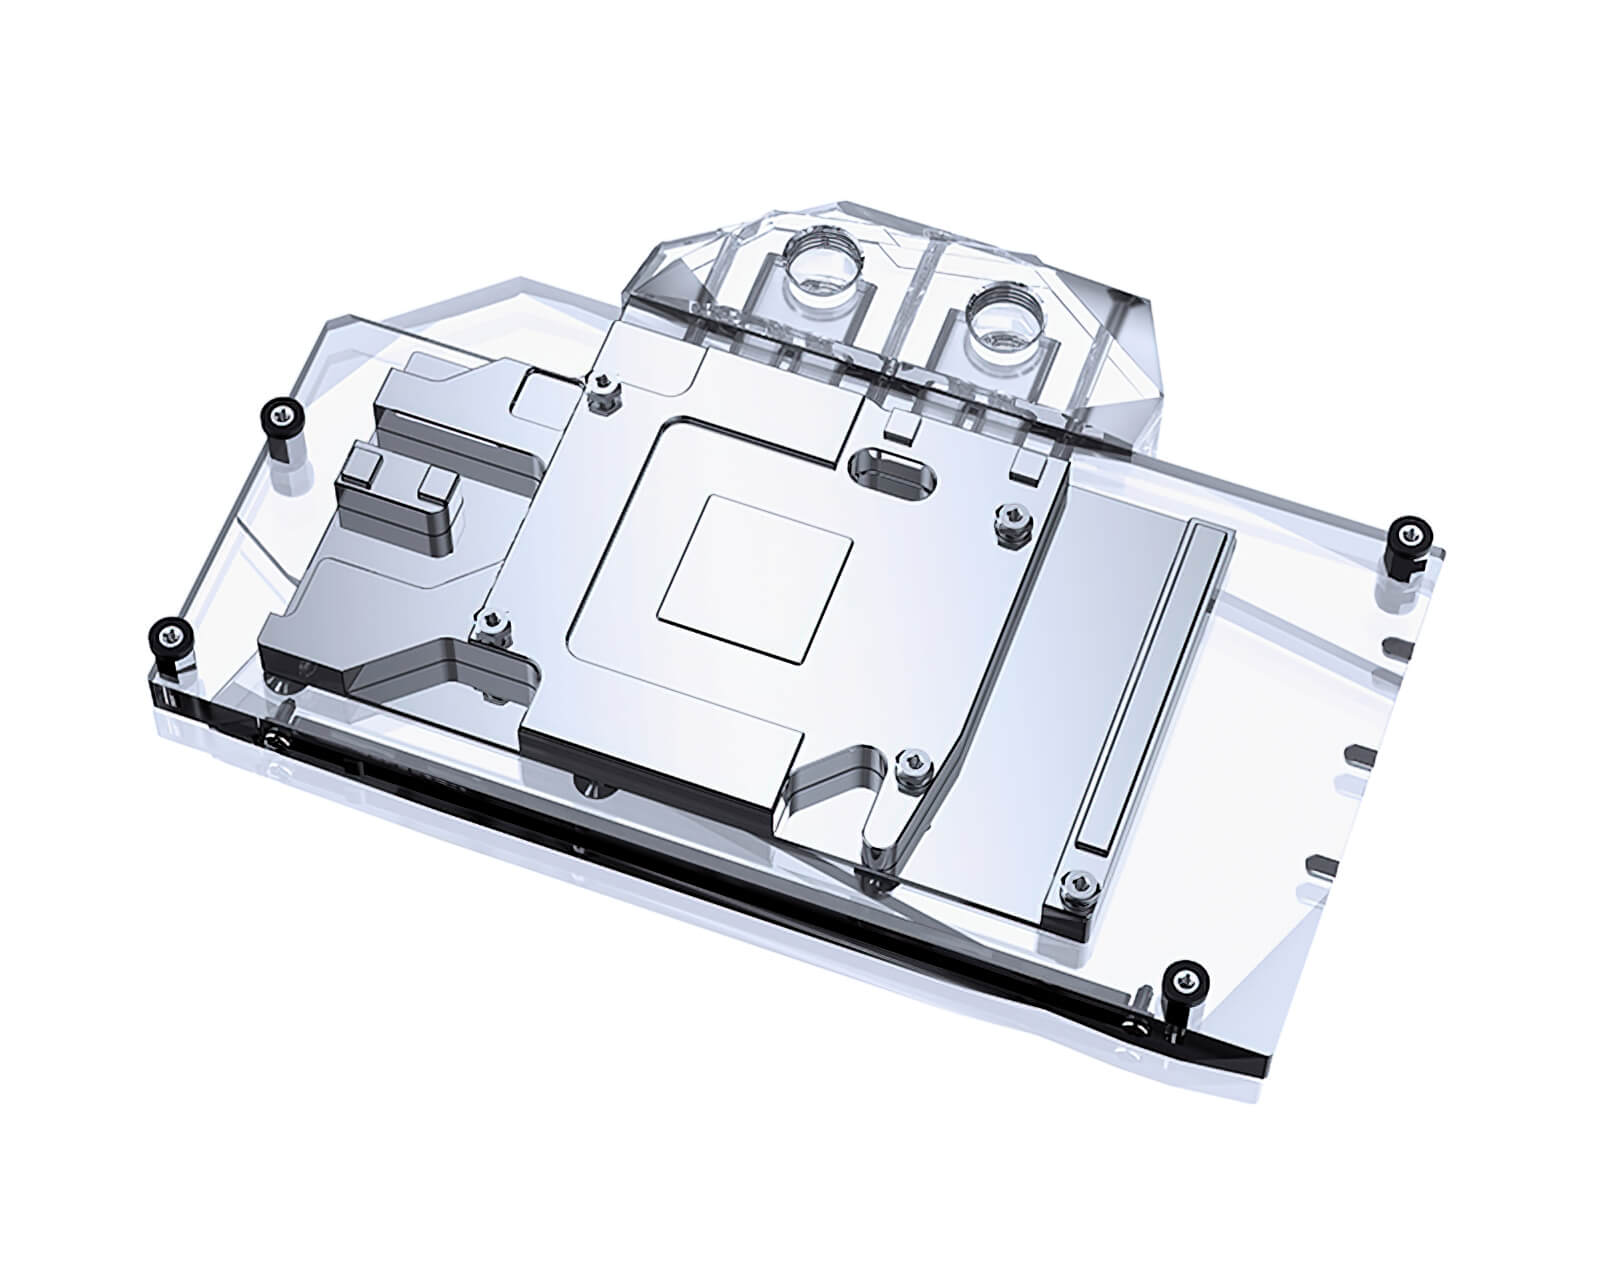 Bykski Full Coverage GPU Water Block and Backplate for Palit RTX 3070 Gaming Pro OC (N-PT3070PRO-X) - PrimoChill - KEEPING IT COOL